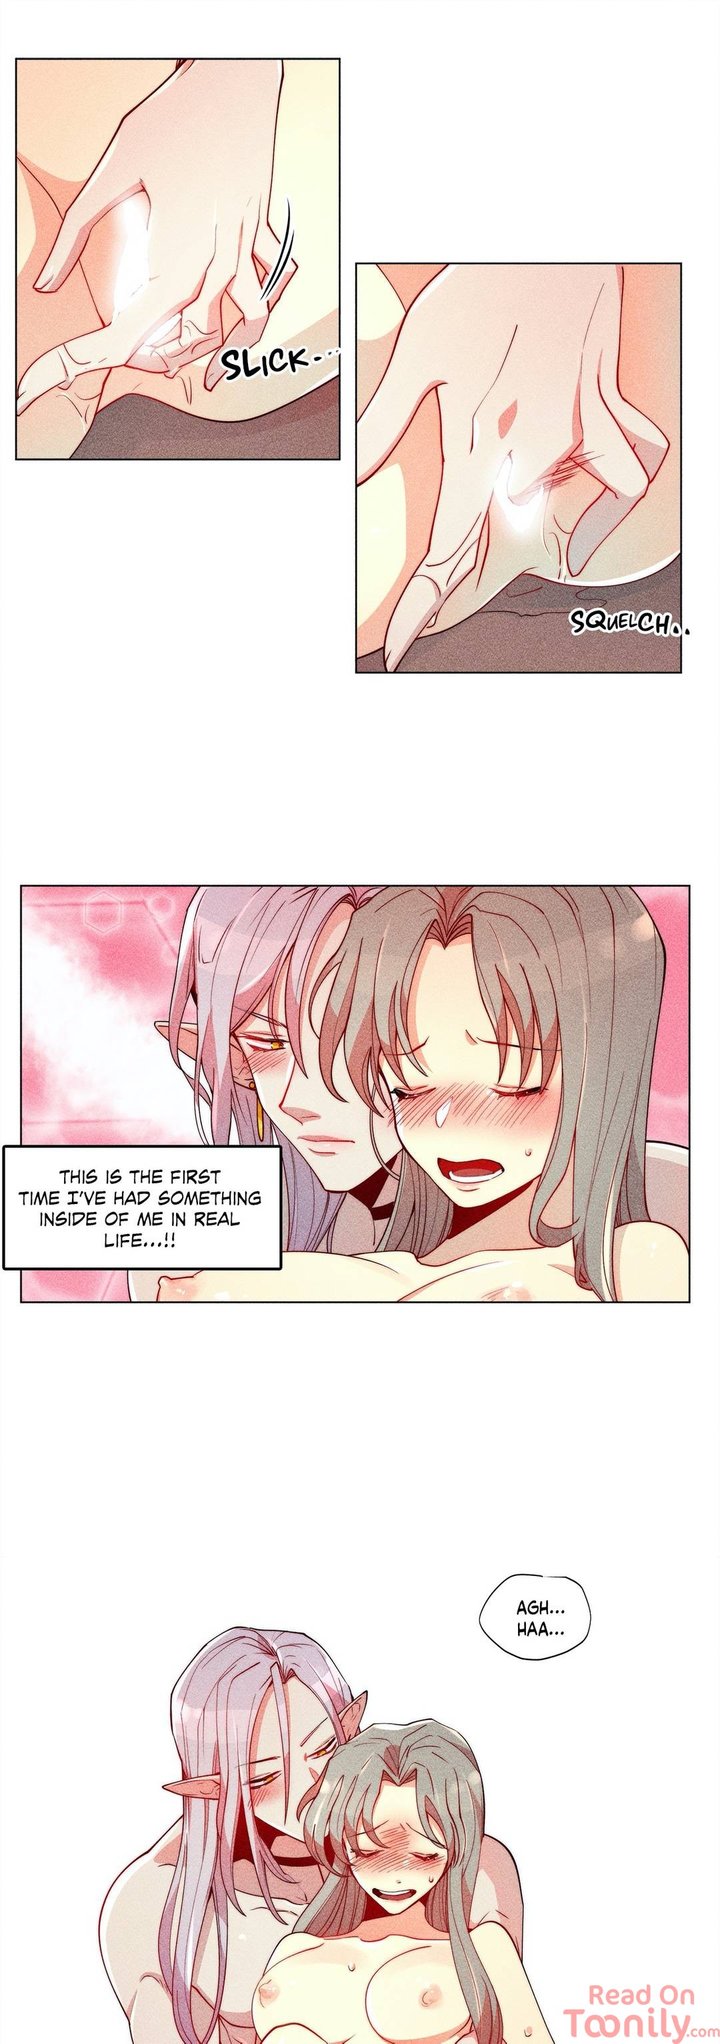 Virgin Witch - The Virgin Witch - Chapter 19 - Read Manhwa raw, Manhwa hentai, Manhwa 18,  Raw Manga, Hentai Manhwa, Hentai Manga, Hentai Comics